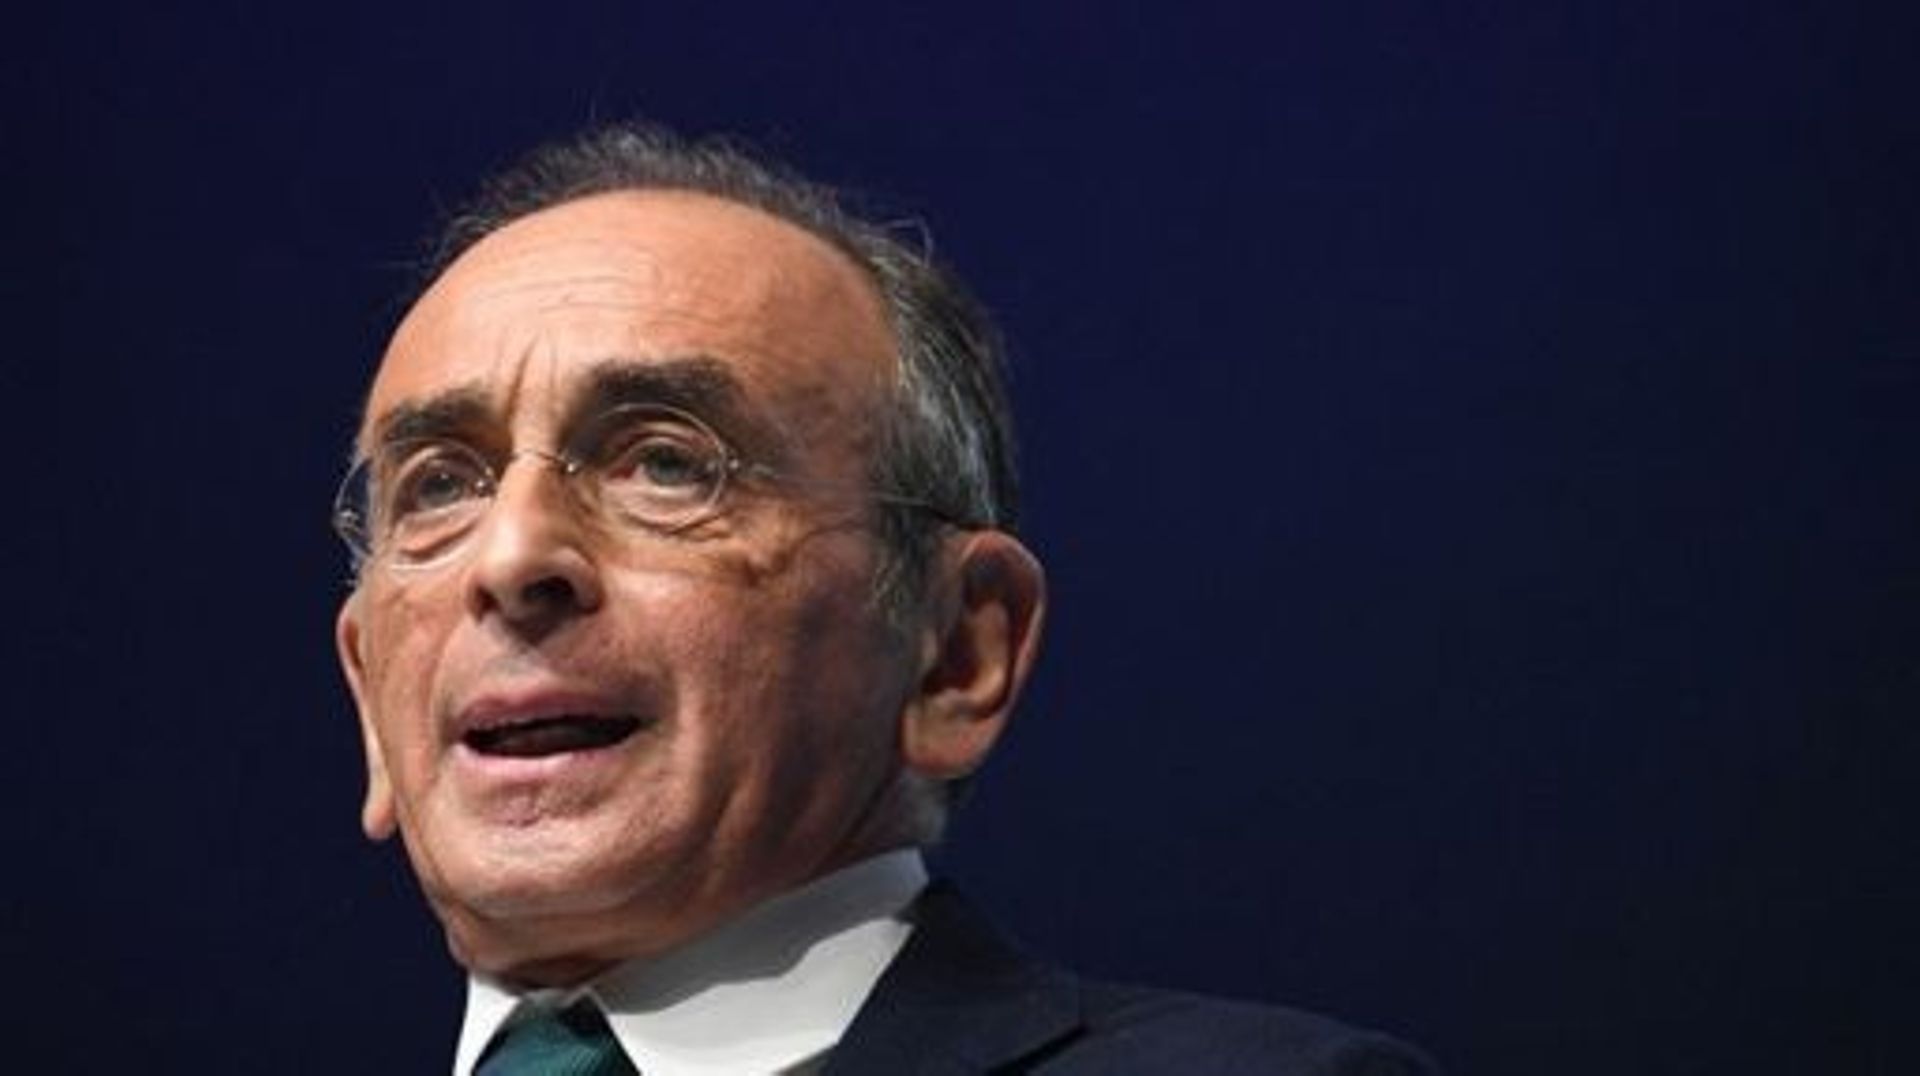 (FILES) In this file photo taken on December 4, 2022 France's far-right party "Reconquete!" leader Eric Zemmour gives a speech during a political rally to mark the first anniversary of his party in Paris. The European Court of Human Rights (ECHR) will del